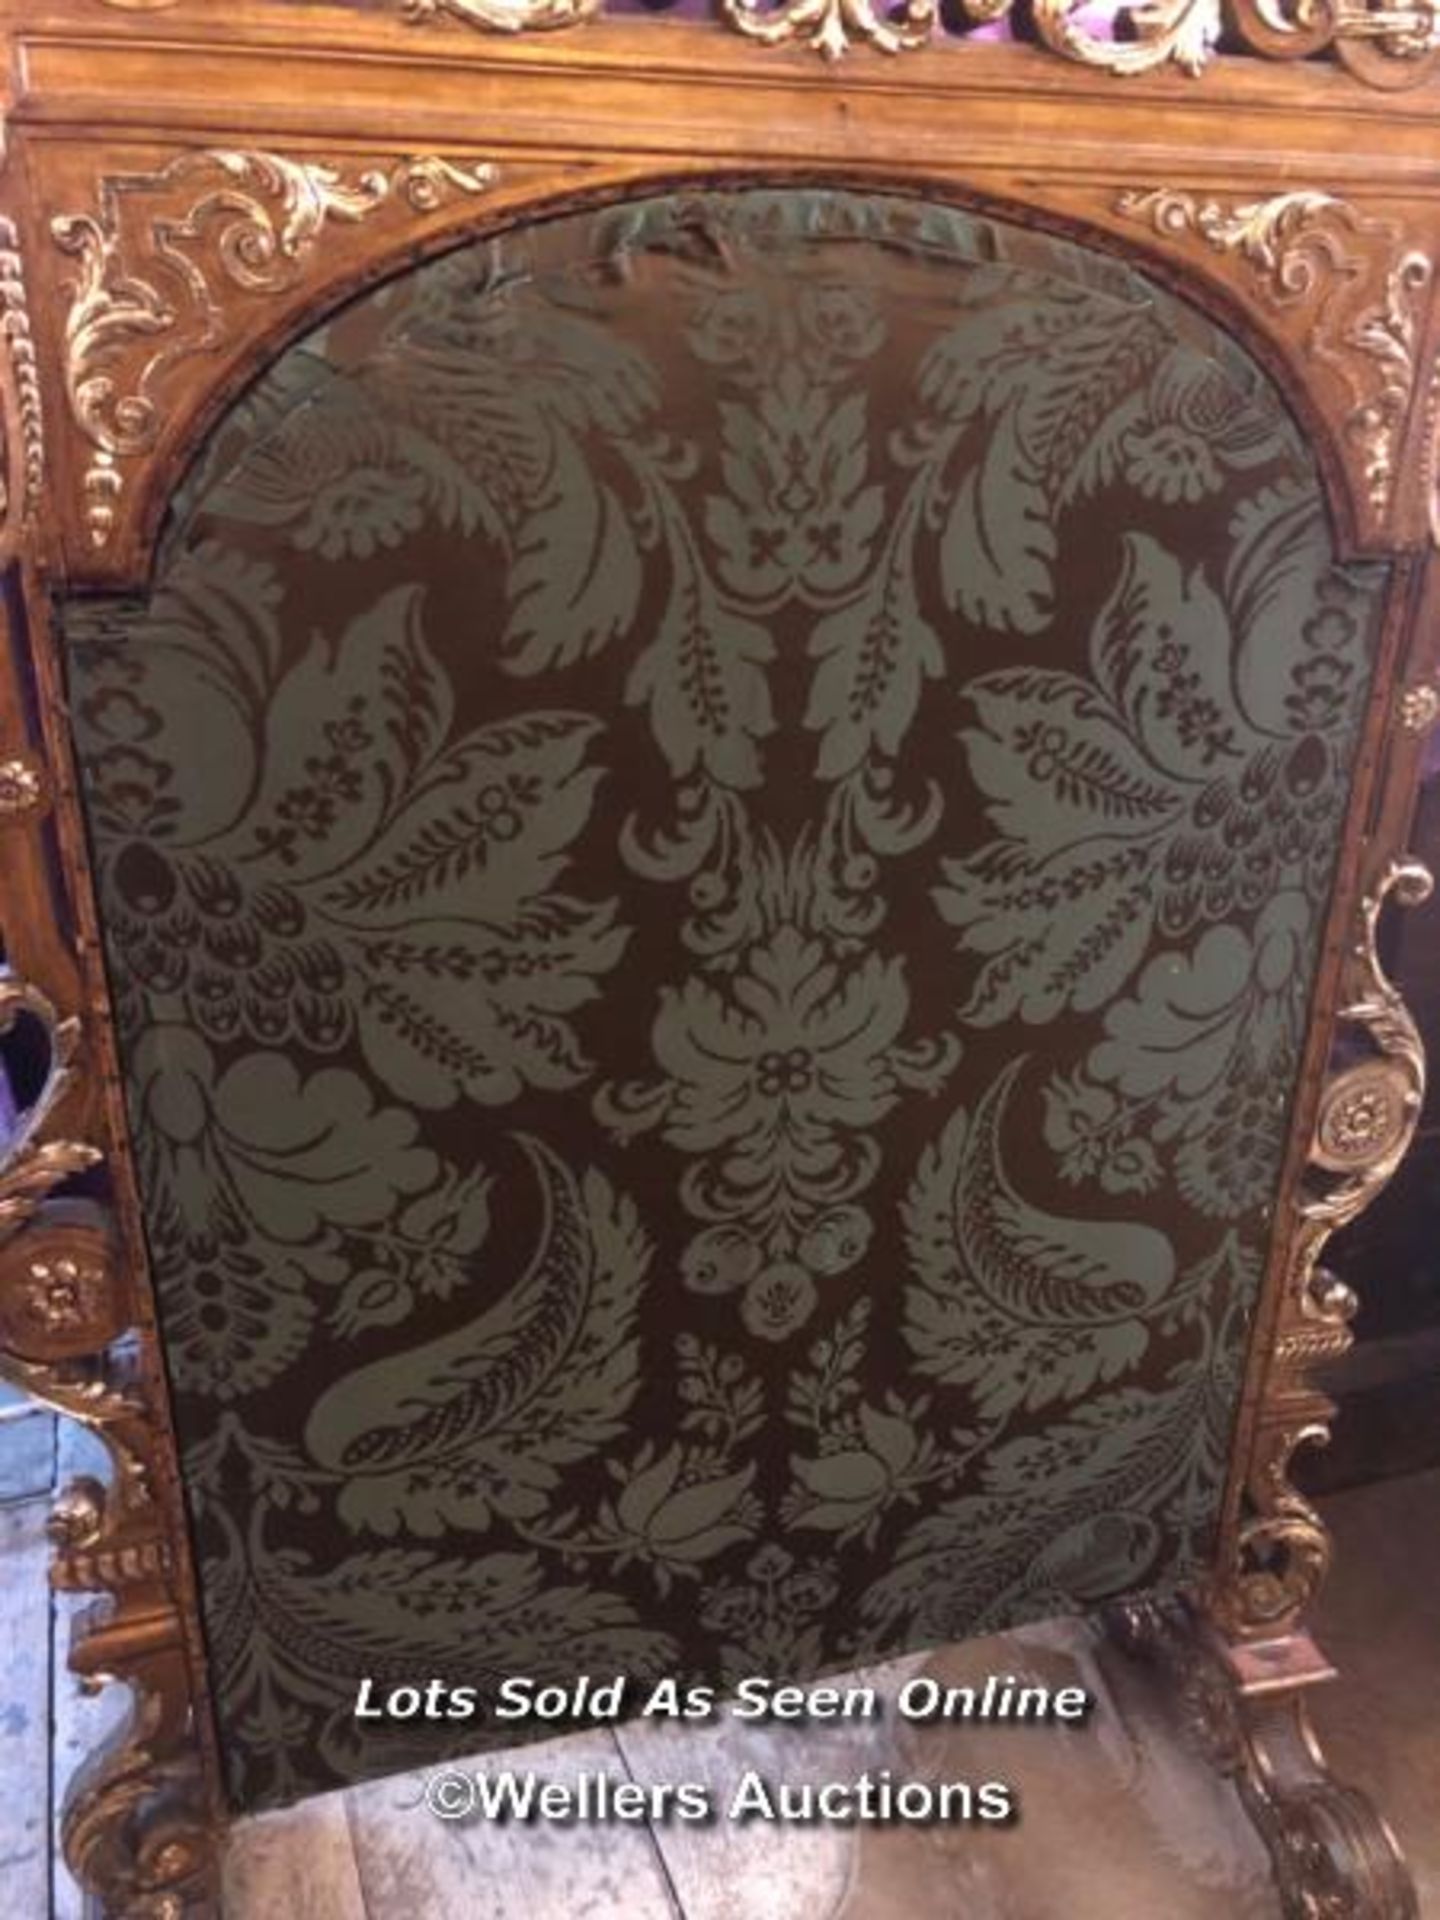 LARGE AND IMPRESSIVE FIRE SCREEN, ITALIAN ORIGIN, WITH EXTENSIVE CARVING AND GILDING, 88 X 40 X - Bild 2 aus 9